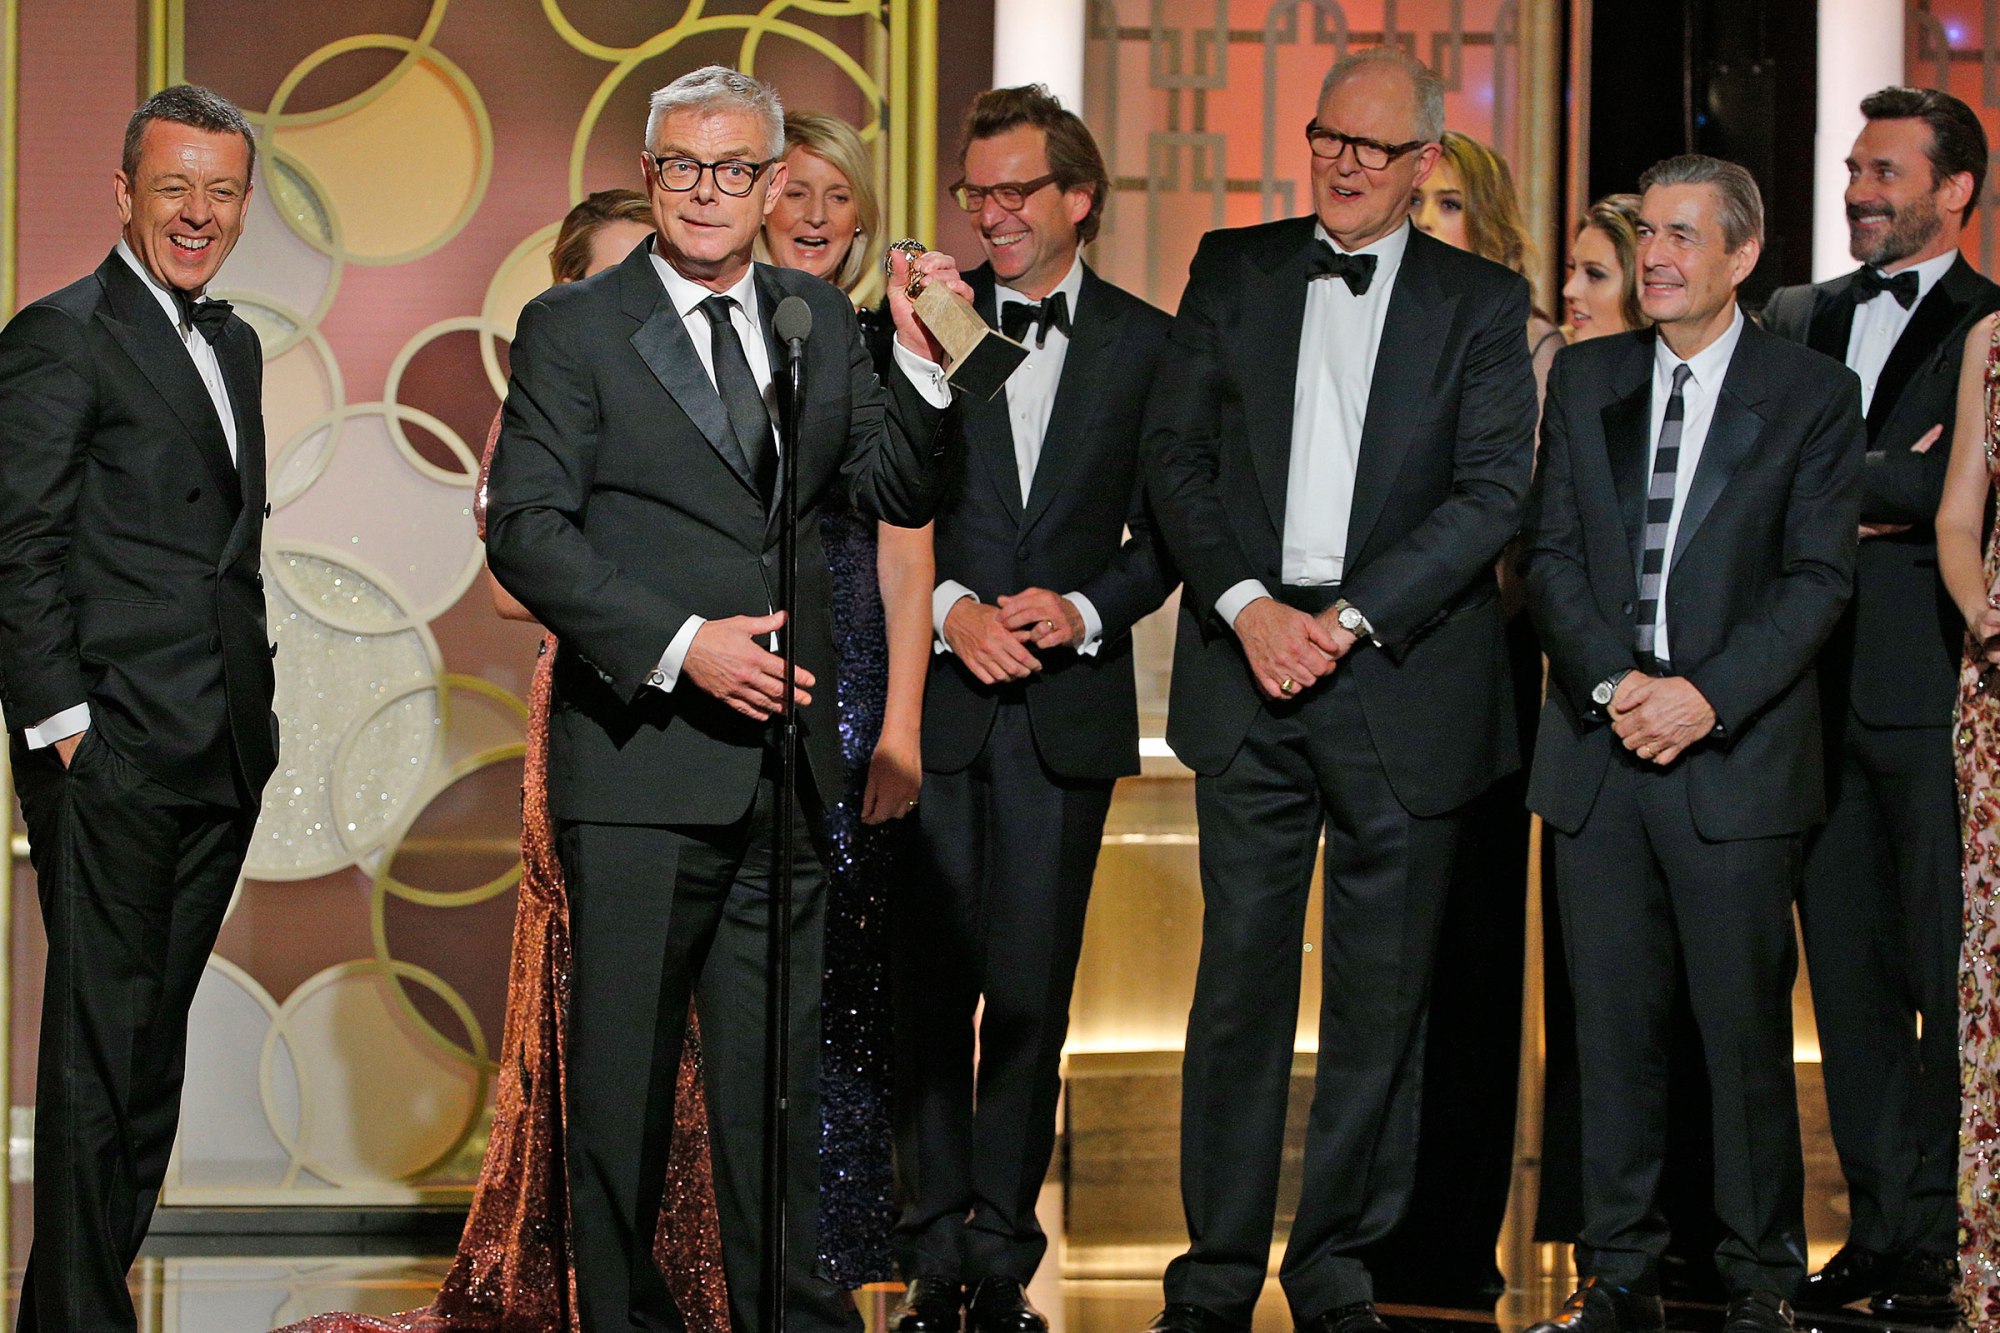 This image released by NBC shows Peter Morgan, from left, Stephen Daldry and the cast and crew of "The Crown," winner of the best drama TV series at the 74th Annual Golden Globe Awards at the Beverly Hilton Hotel in Beverly Hills, Calif., on Sunday, Jan. 8, 2017. (Paul Drinkwater/NBC via AP)